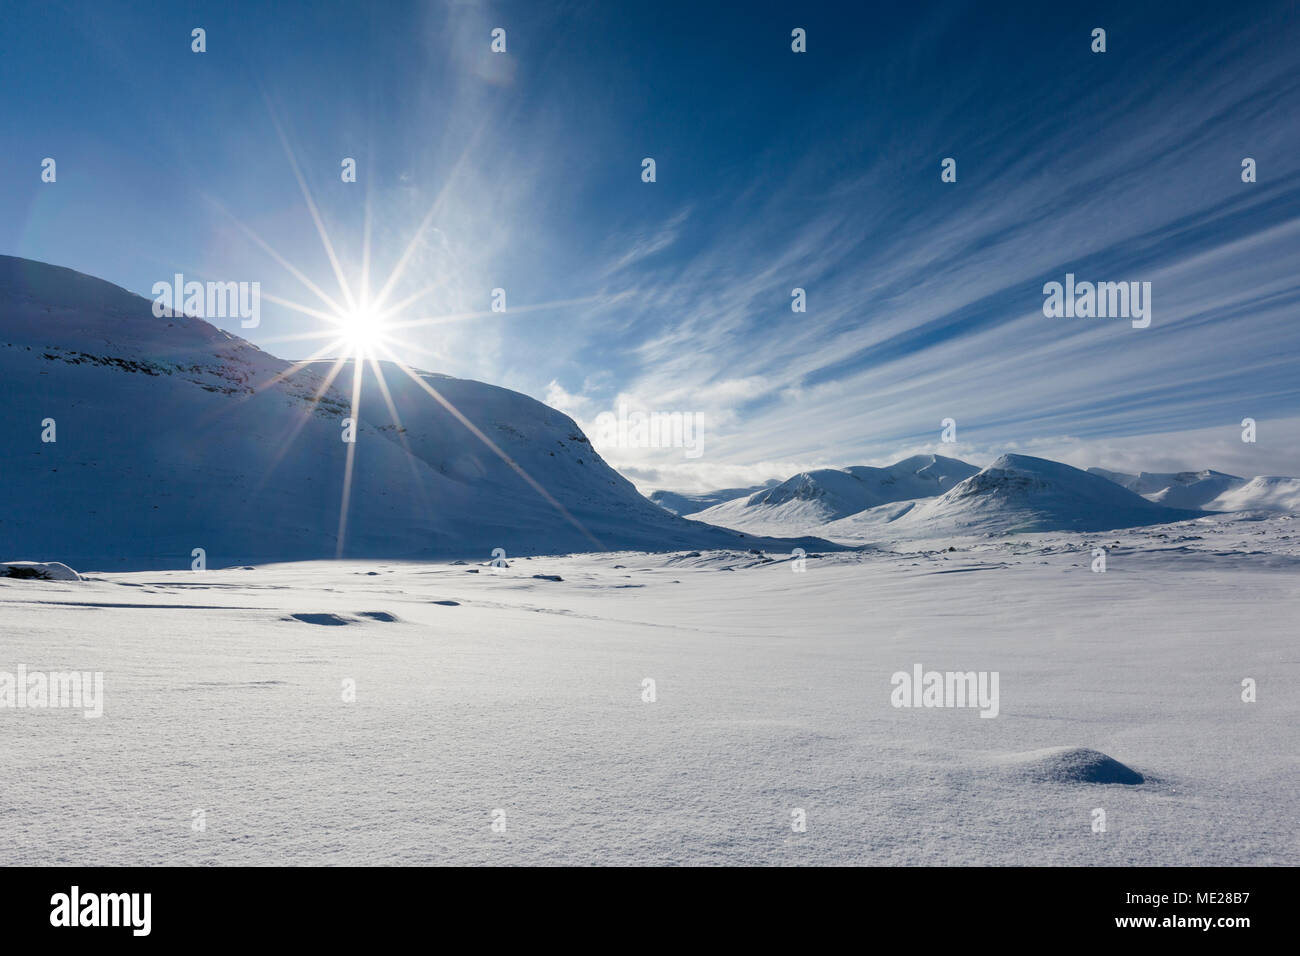 Sun over mountain range in the snow, Kungsleden or king's trail, Province of Lapland, Sweden, Scandinavia Stock Photo